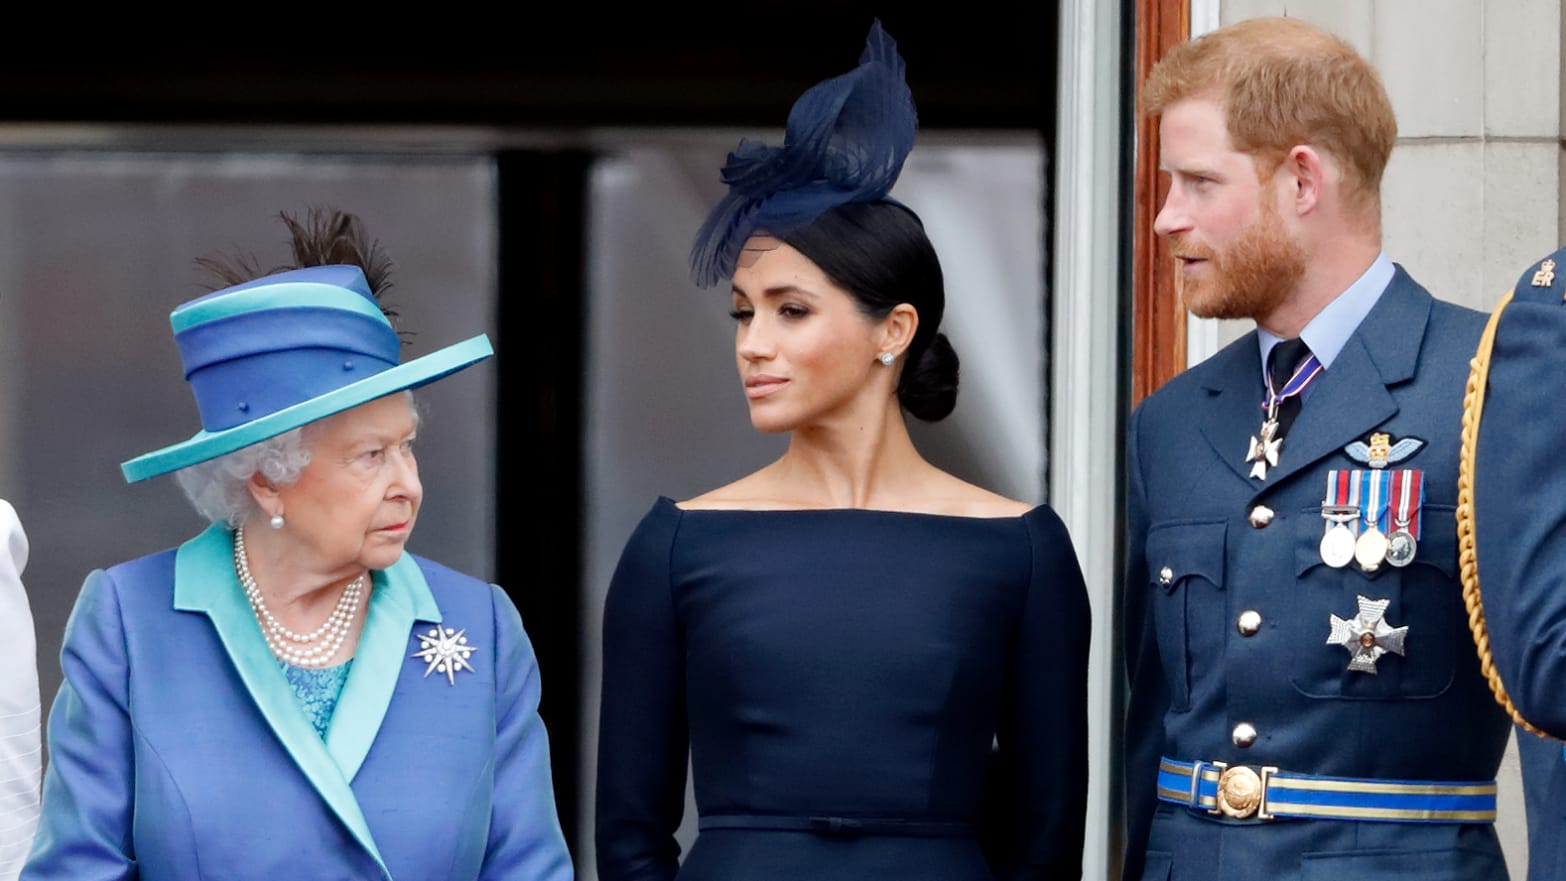 Queen Elizabeth II, Meghan, Duchess of Sussex and Prince Harry, Duke of Sussex watch a flypast to mark the centenary of the Royal Air Force from the balcony of Buckingham Palace on July 10, 2018 in London, England.